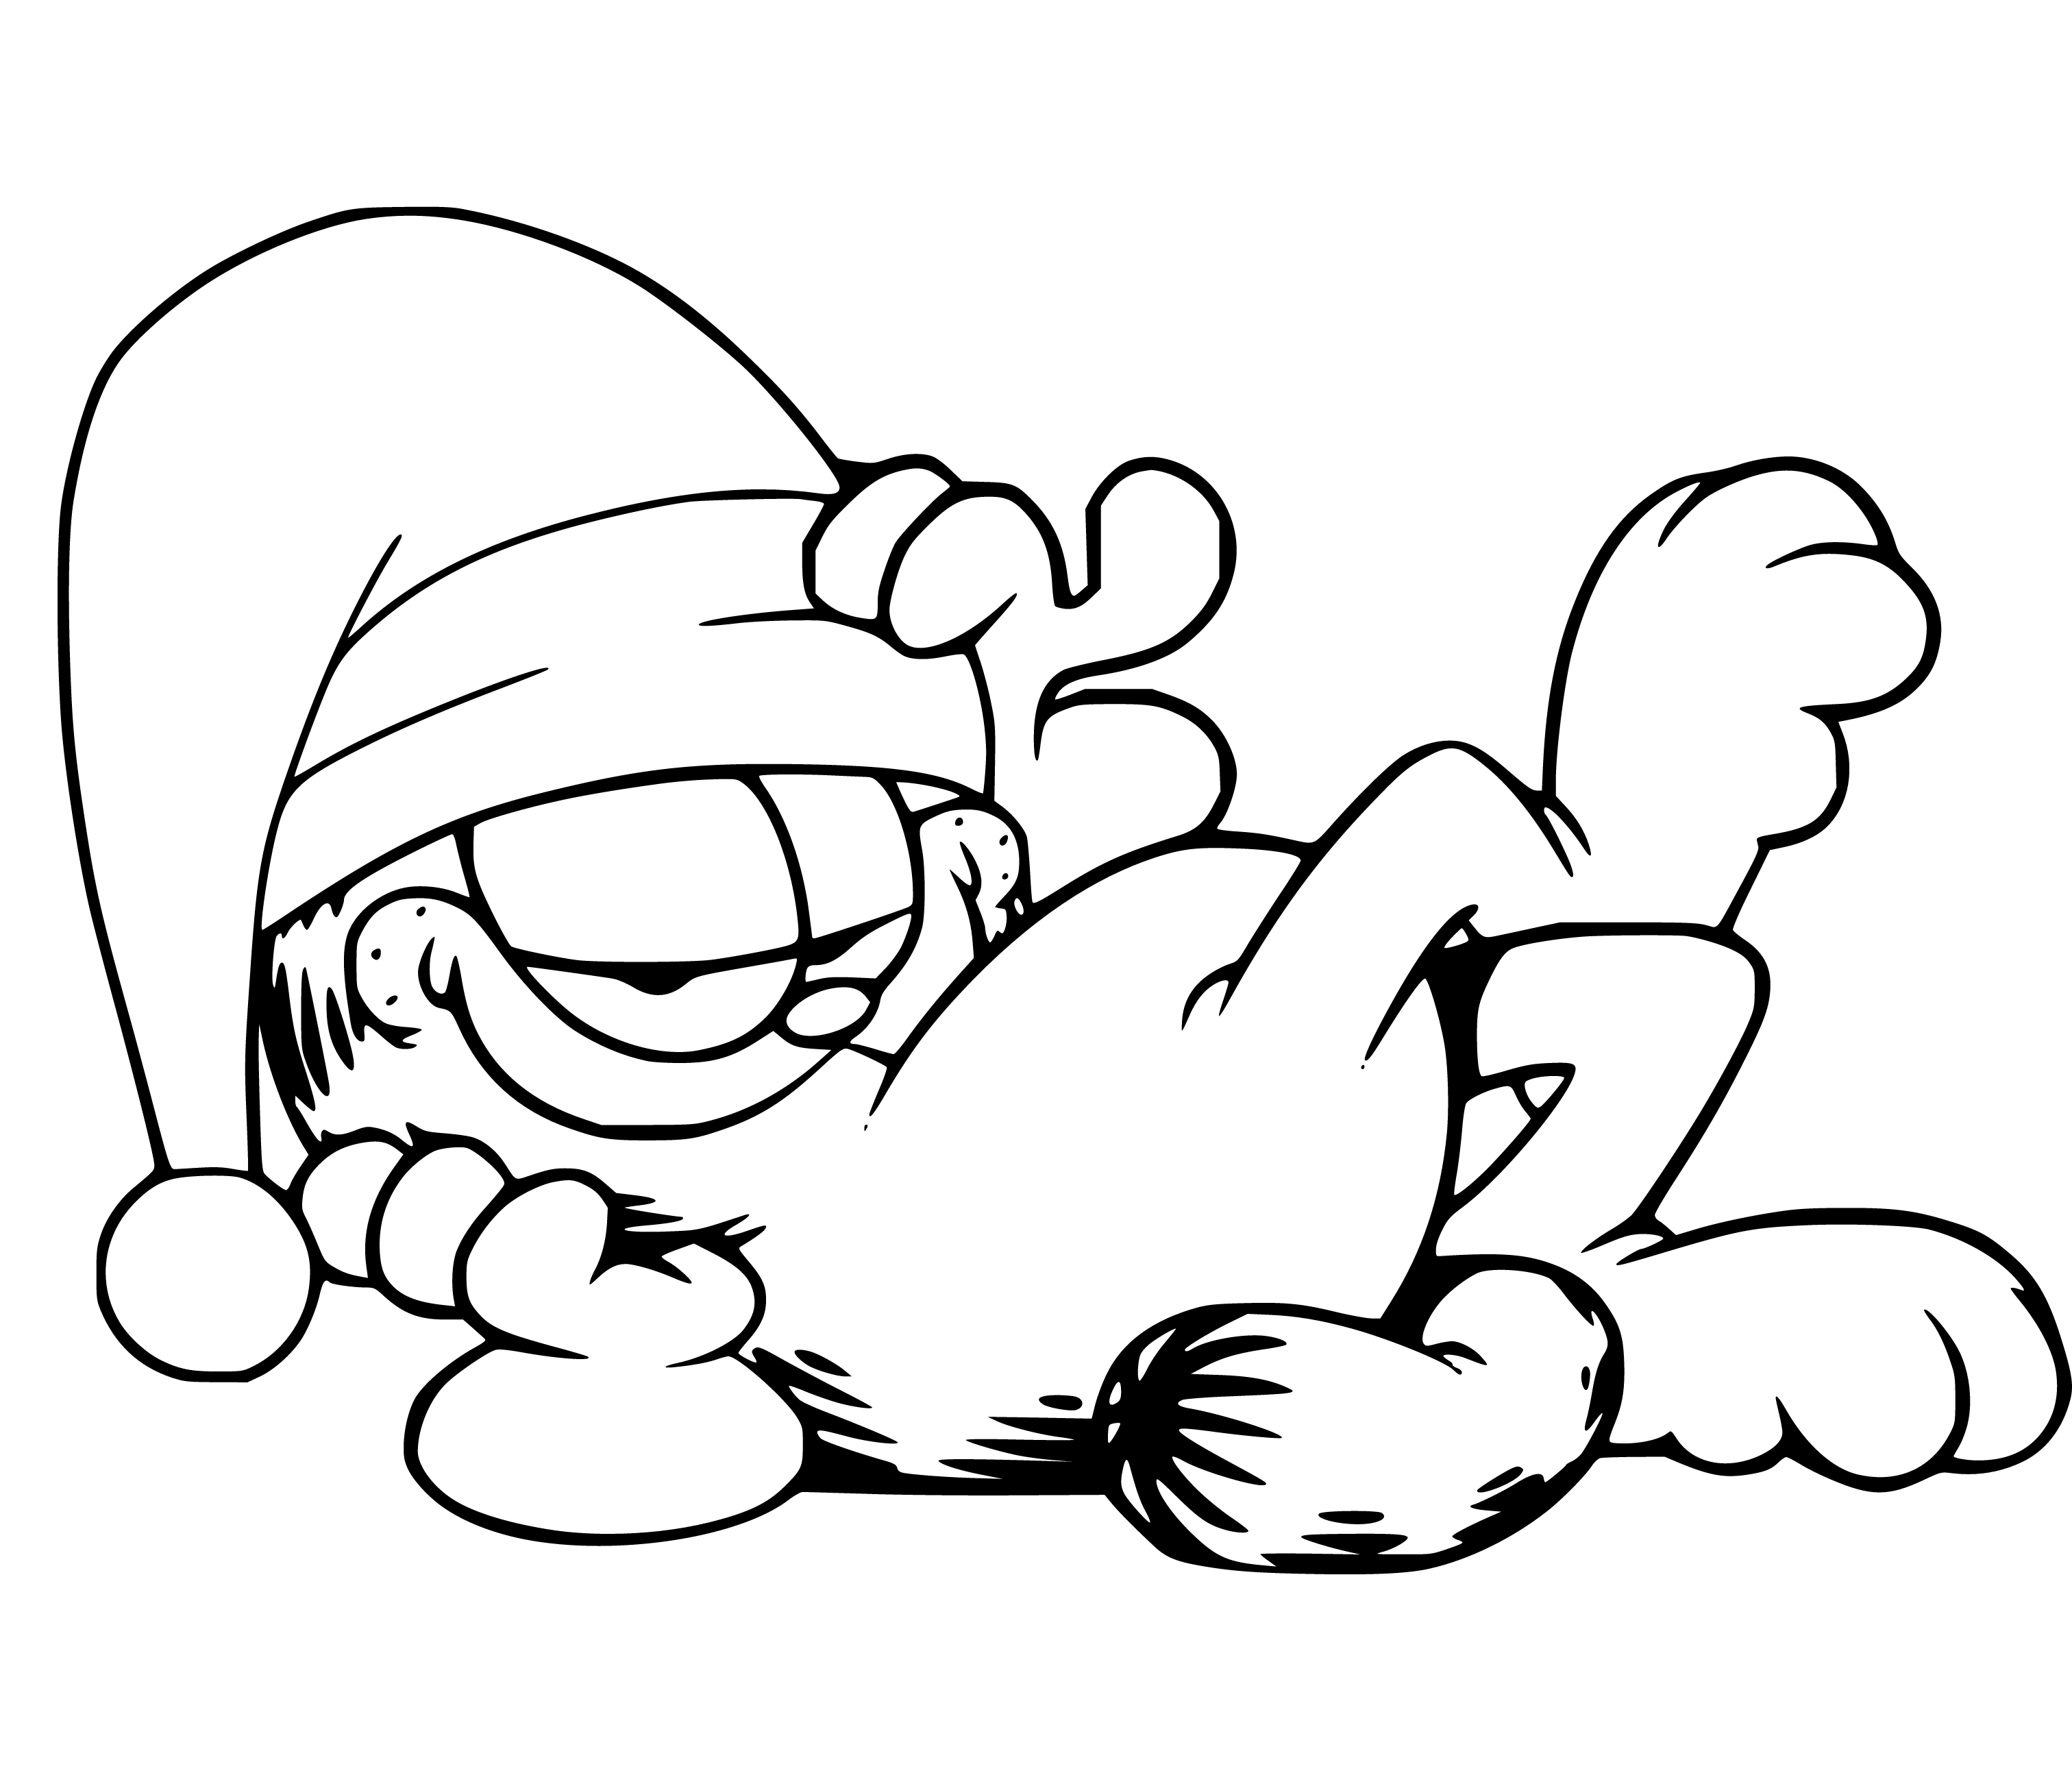 Printable Garfield Christmas Hat Coloring Page for kids.